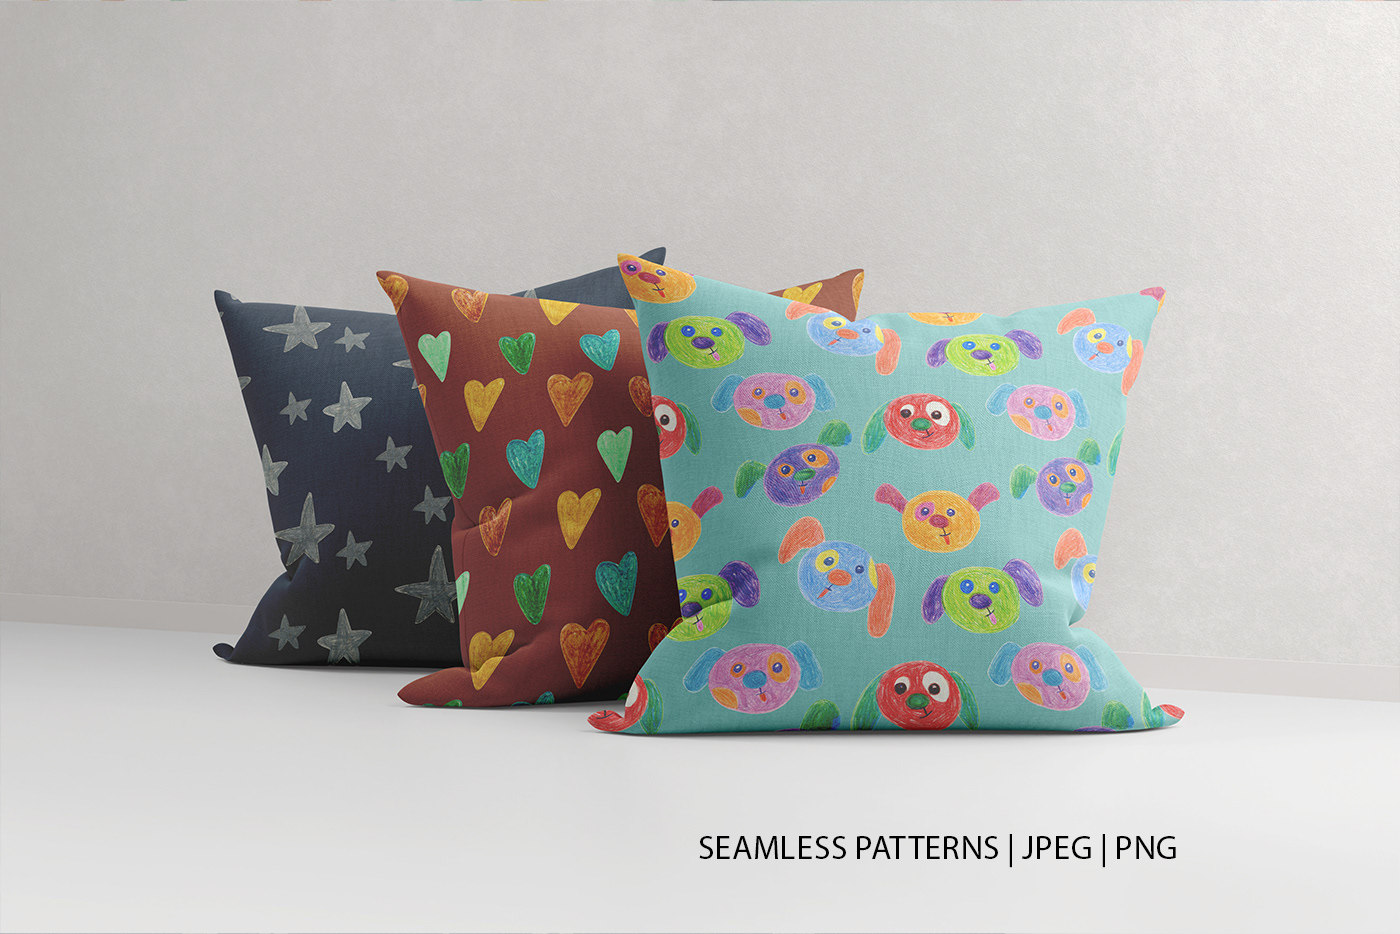 seamless pattern of hand-drawn with wax crayons of dog muzzles, hearts and stars on the pillows